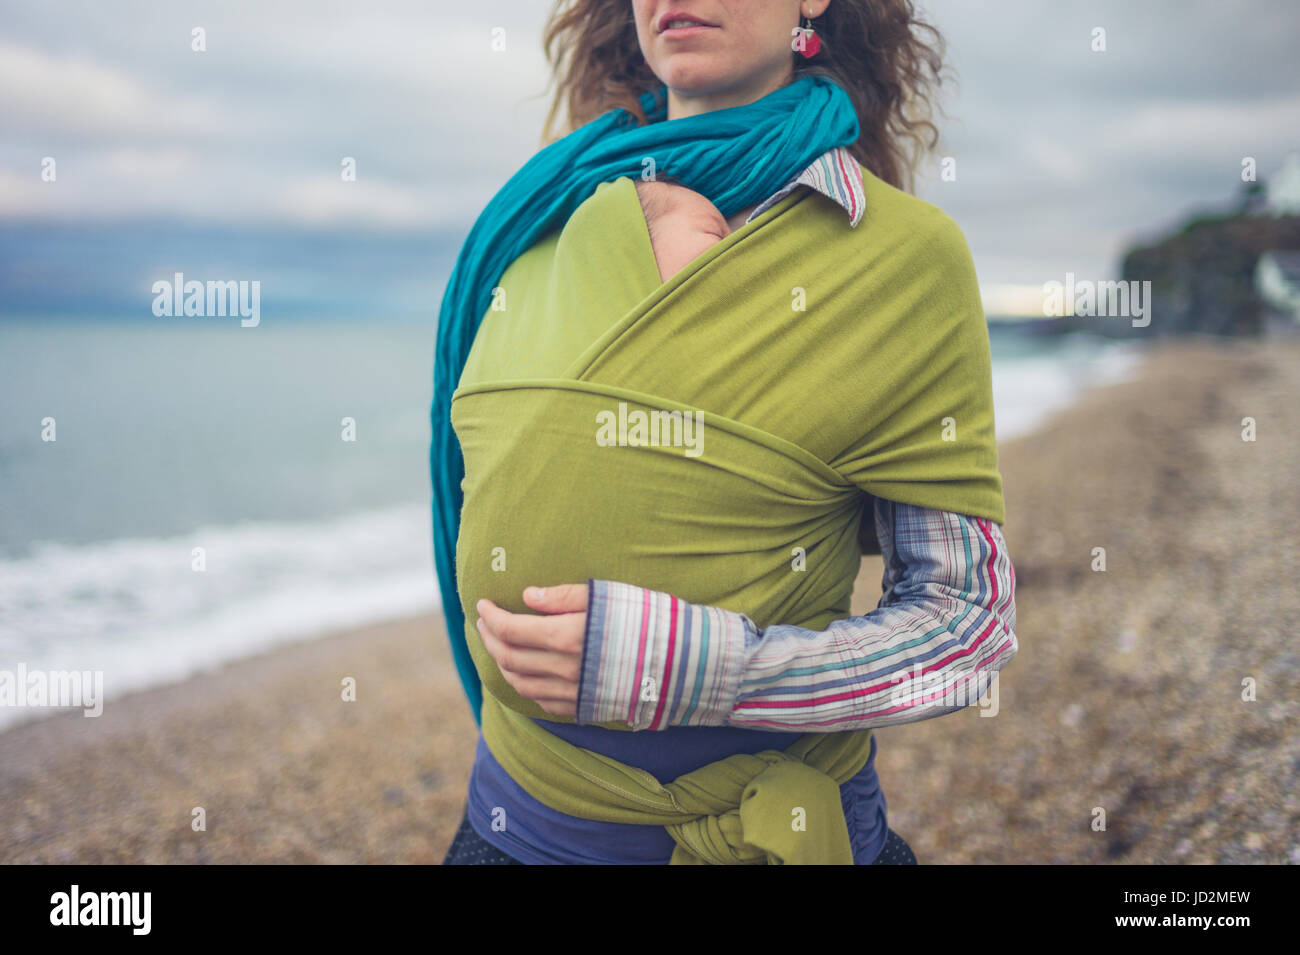 A young mother is by the sea with her baby wrappedd in a sling Stock Photo